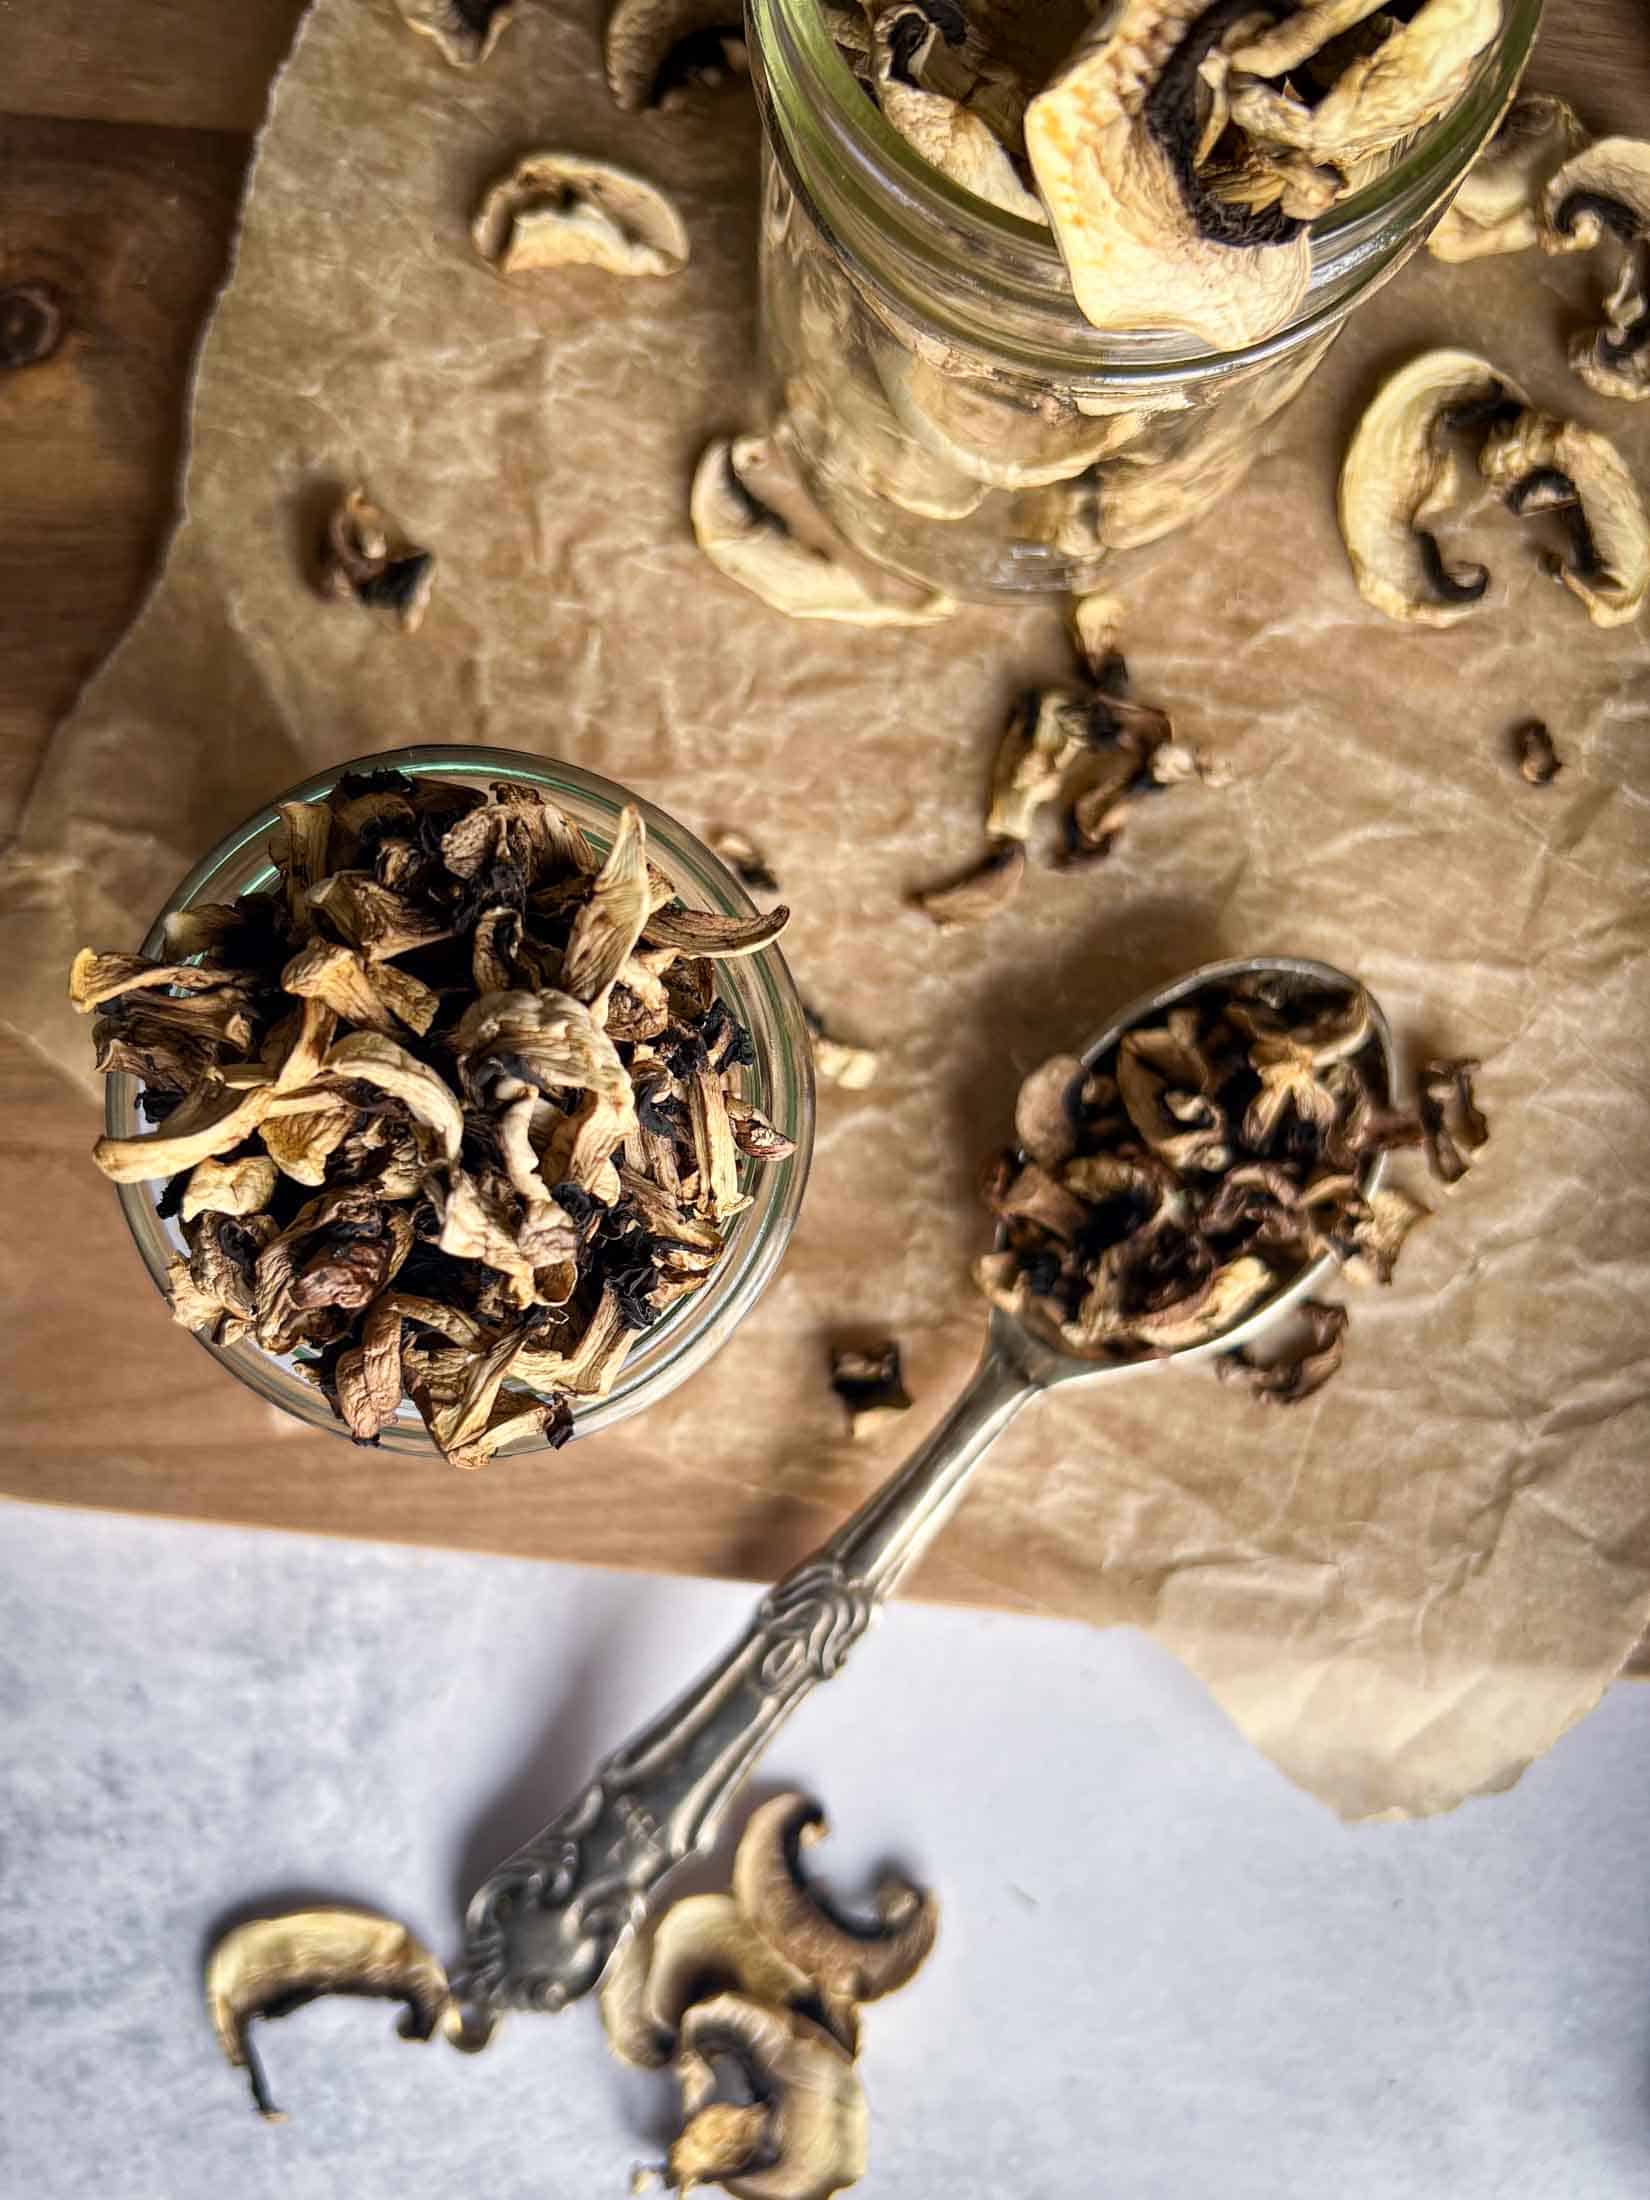 Dried mushrooms spilling out of a glass jar and heaping out of a silver spoon.